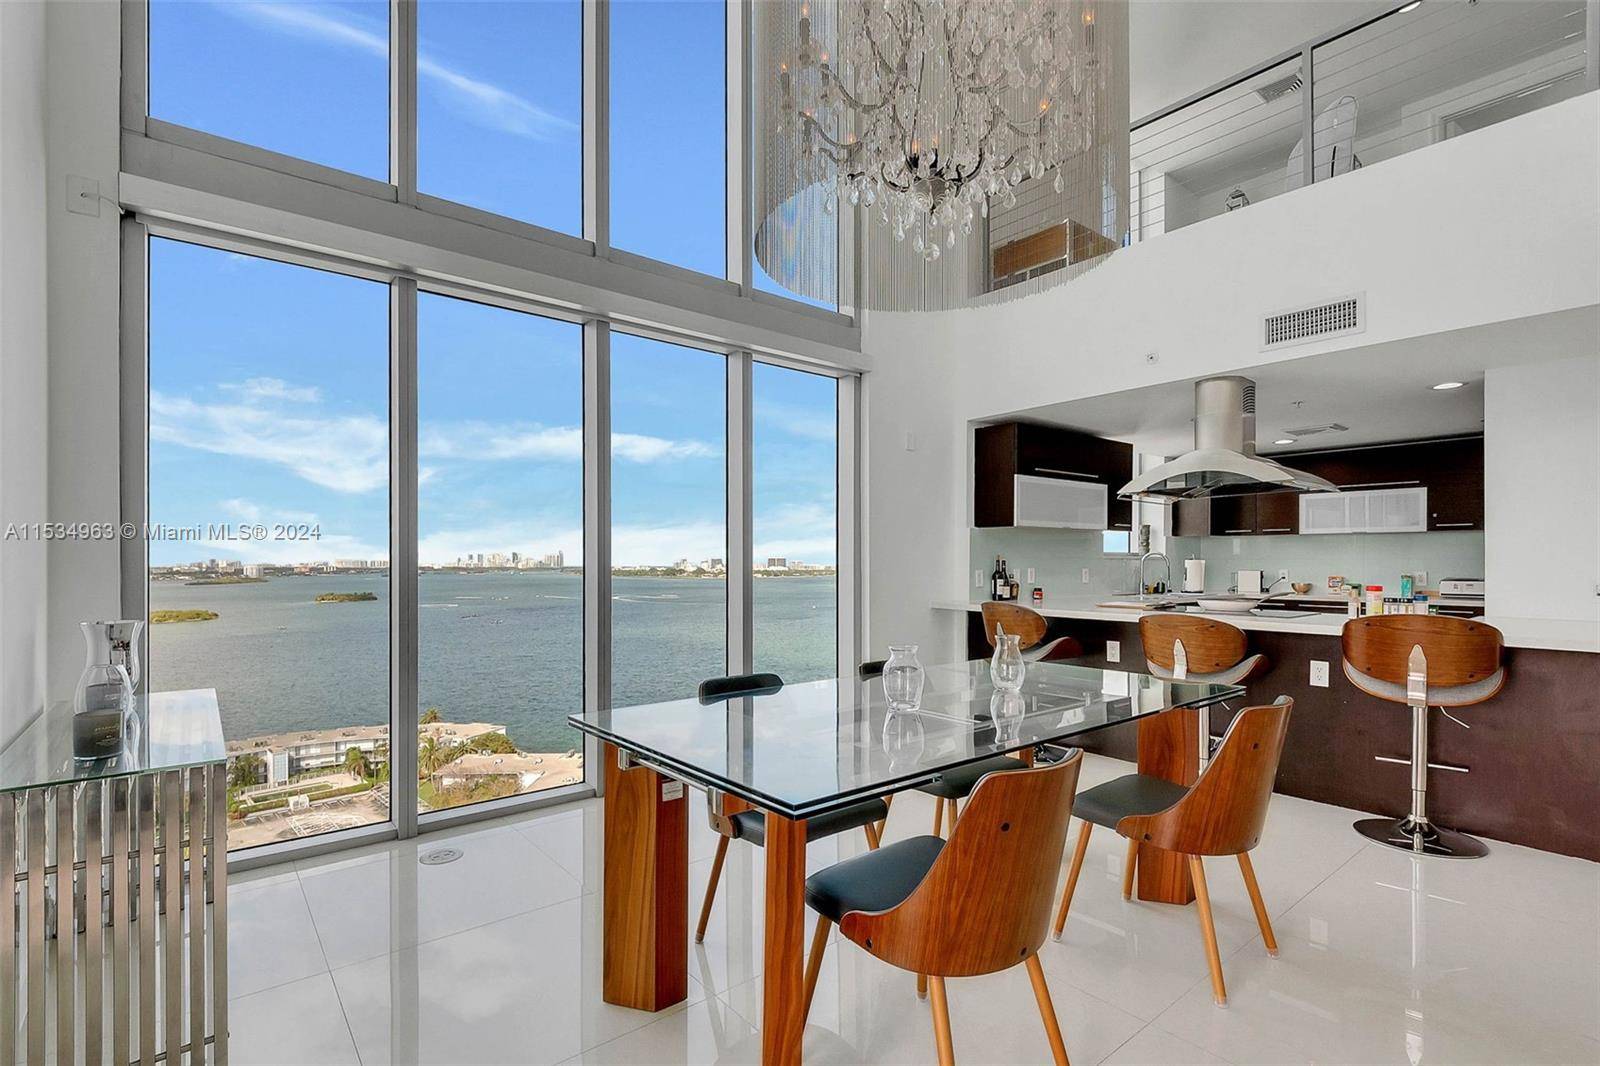 Spectacular Penthouse 2 story corner with 270 degree of breathtaking water views.